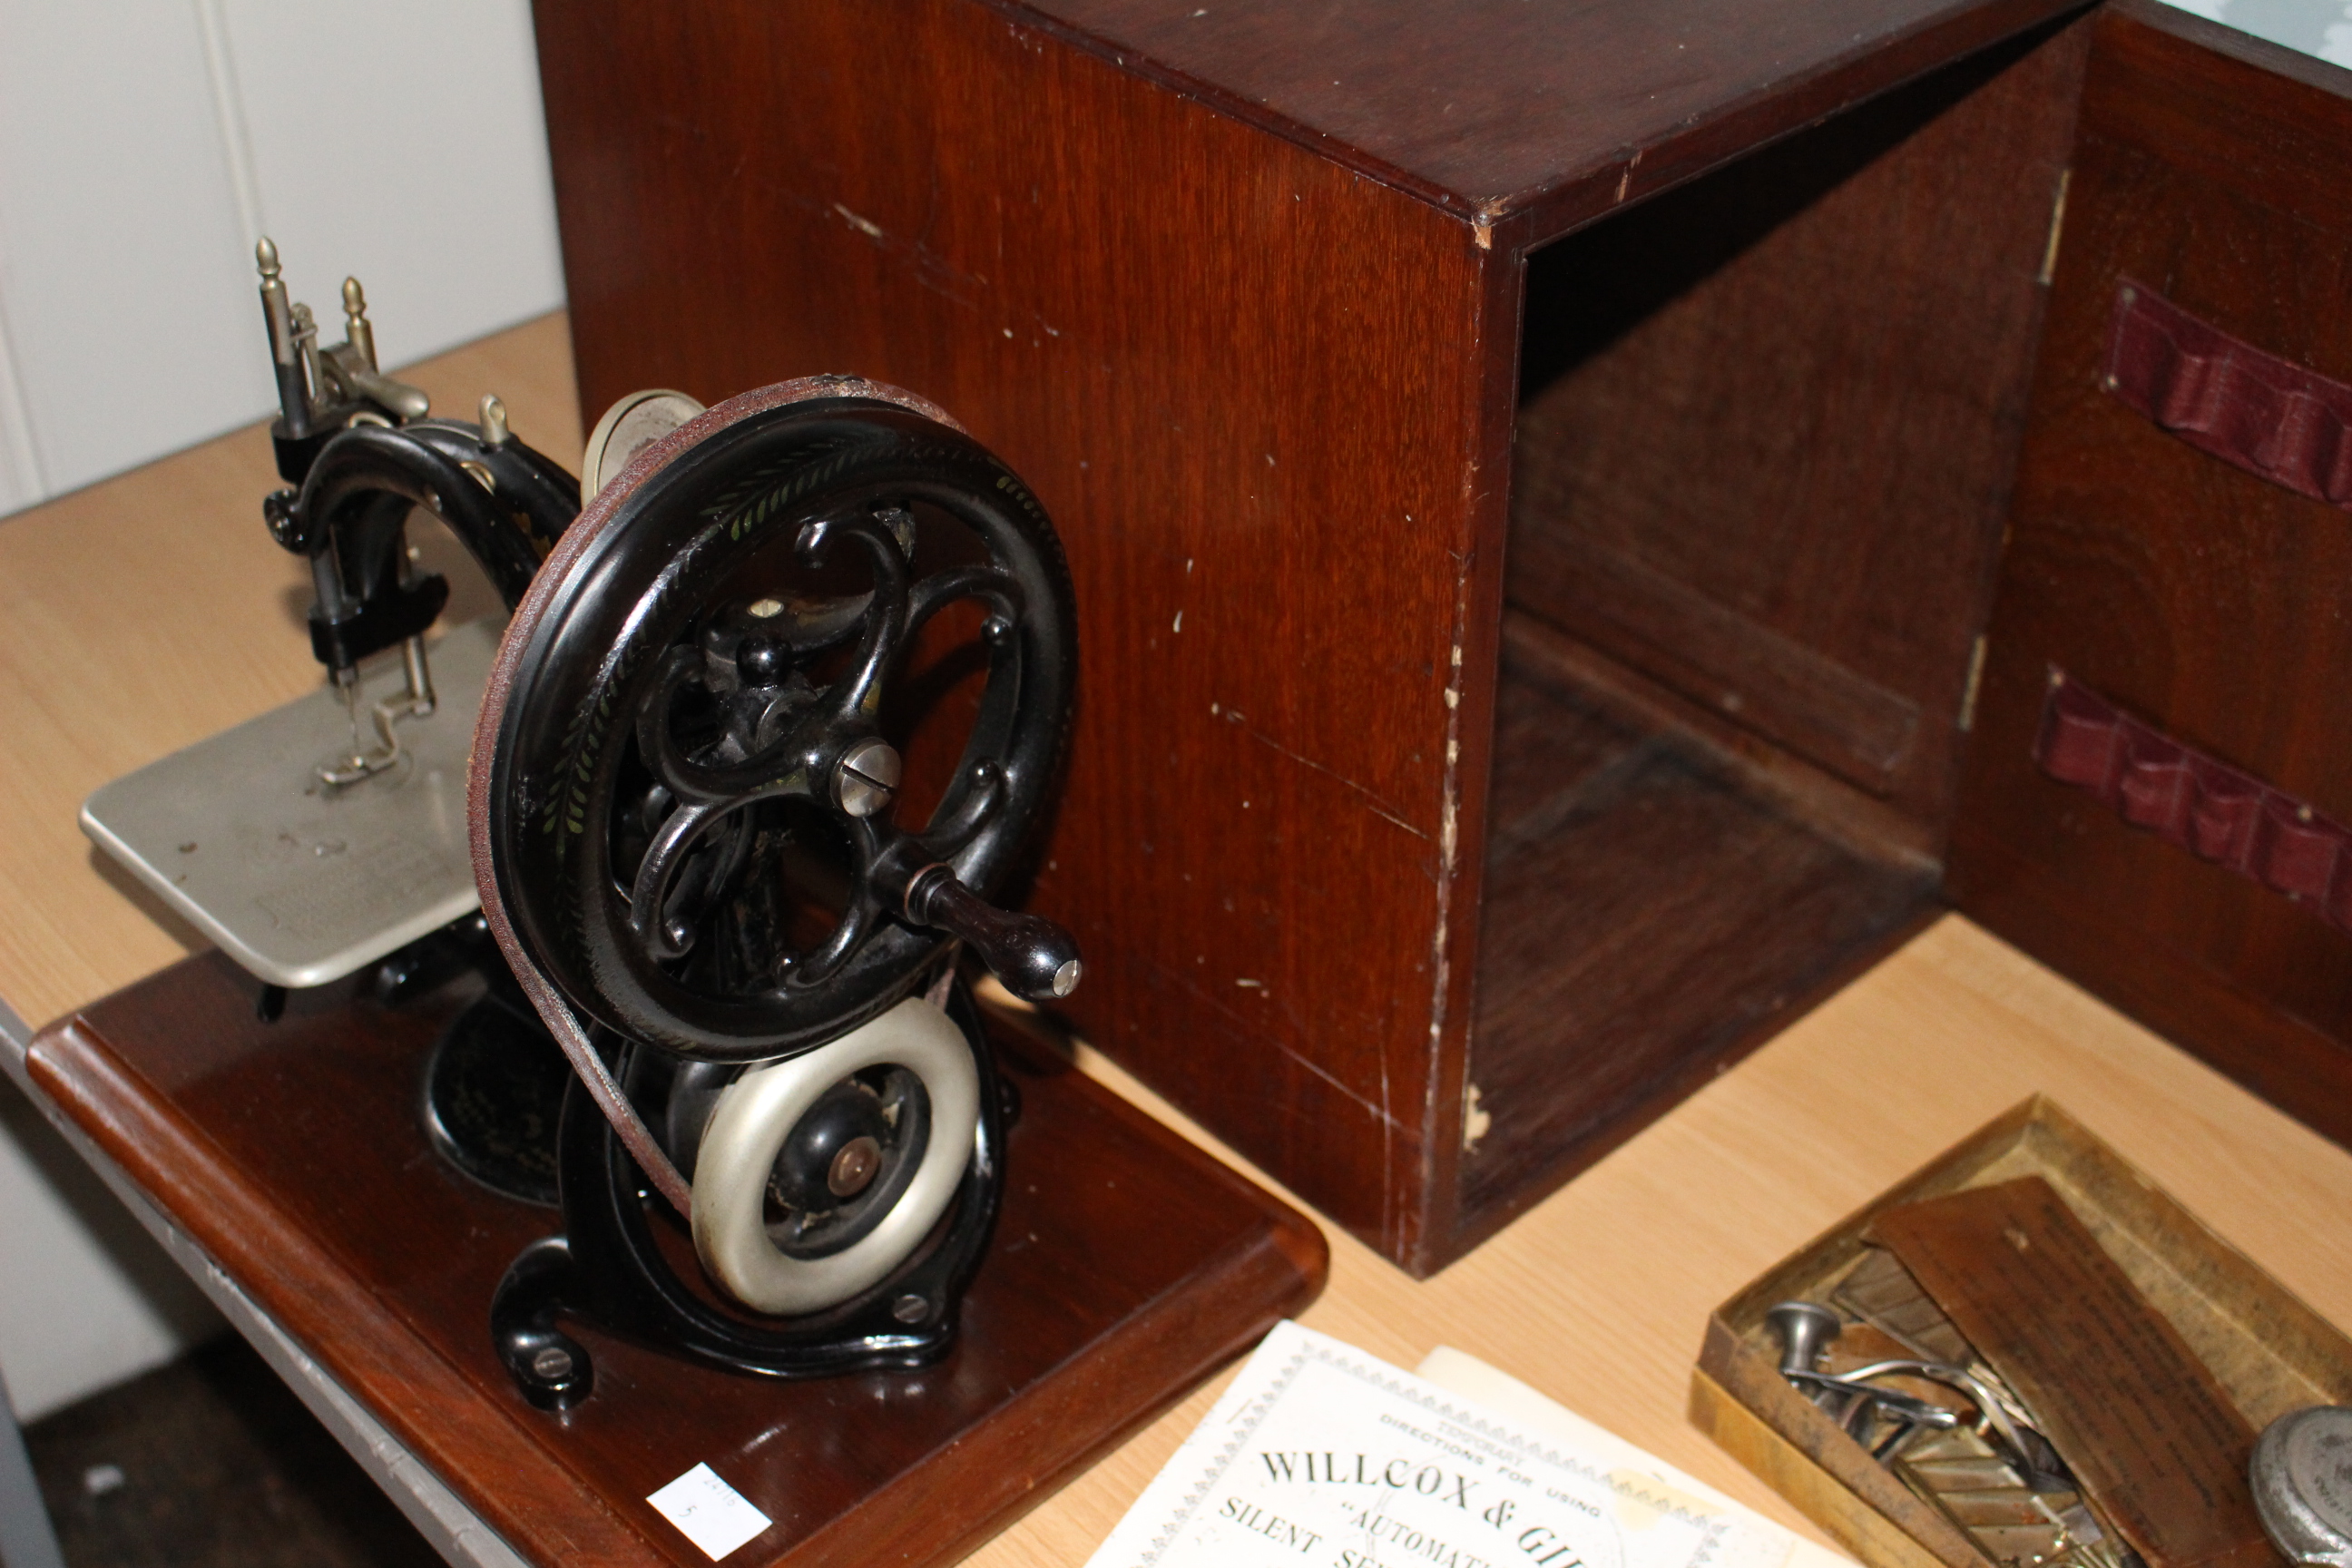 A Willcox and Gibbs silent sewing machine, late 19th century with lockable box and instructions - Image 2 of 2